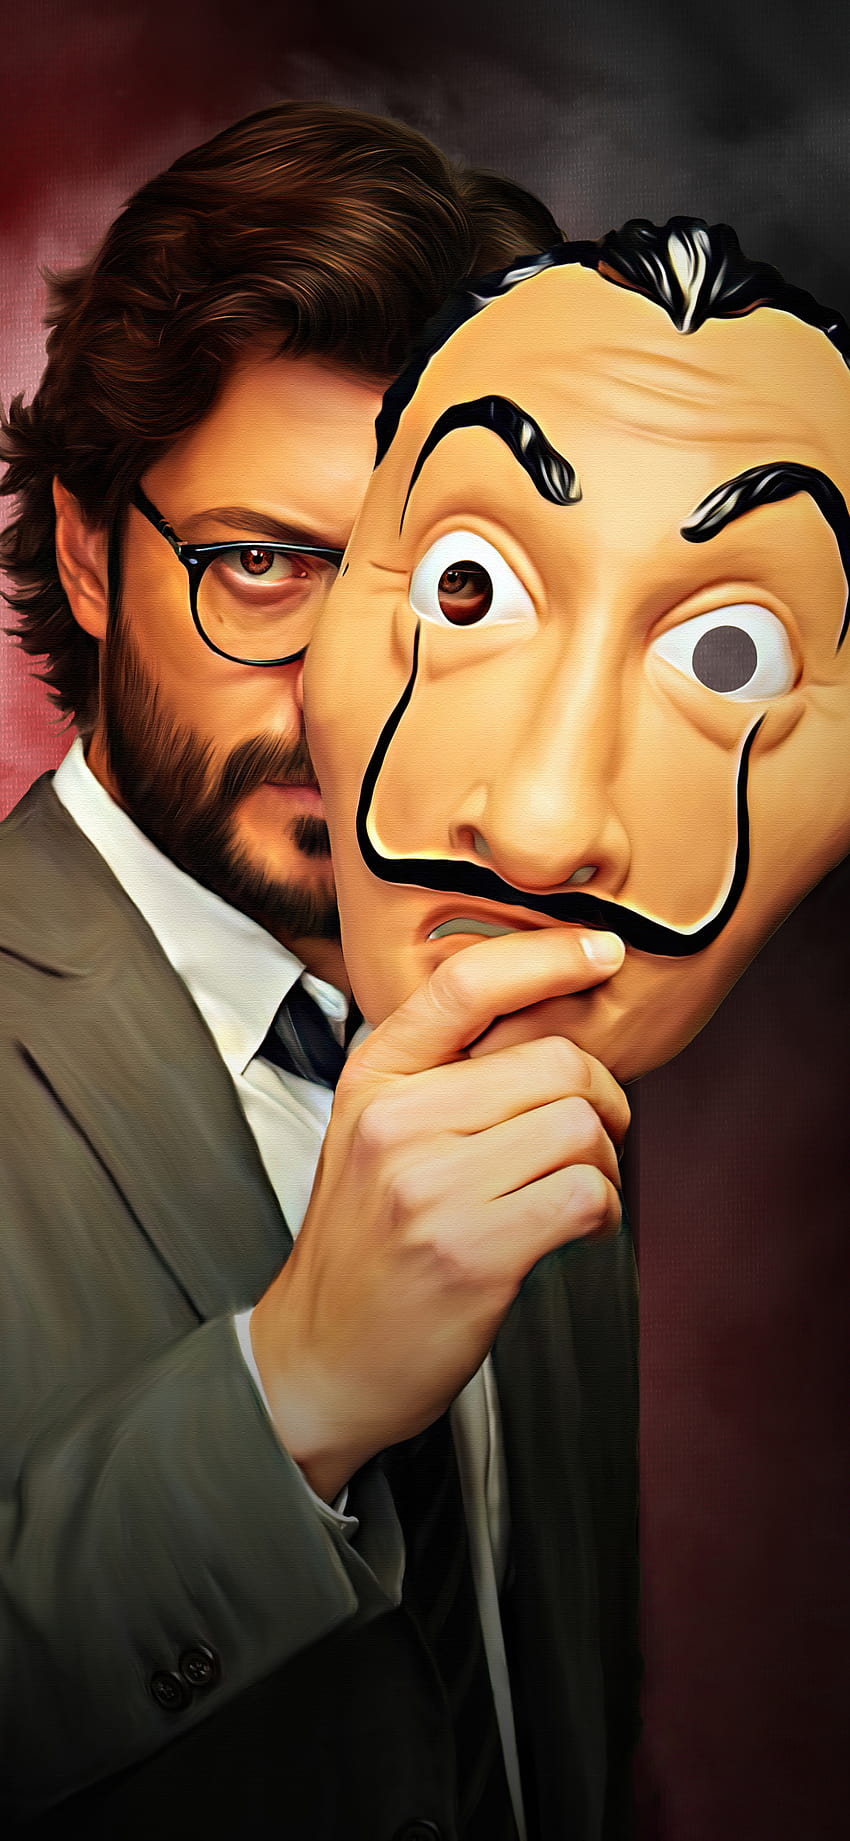 1125x2436 The Professor Digital Painting Money Heist Iphone XS,Iphone 10,Iphone X , Backgrounds, and, professor mobile HD phone wallpaper